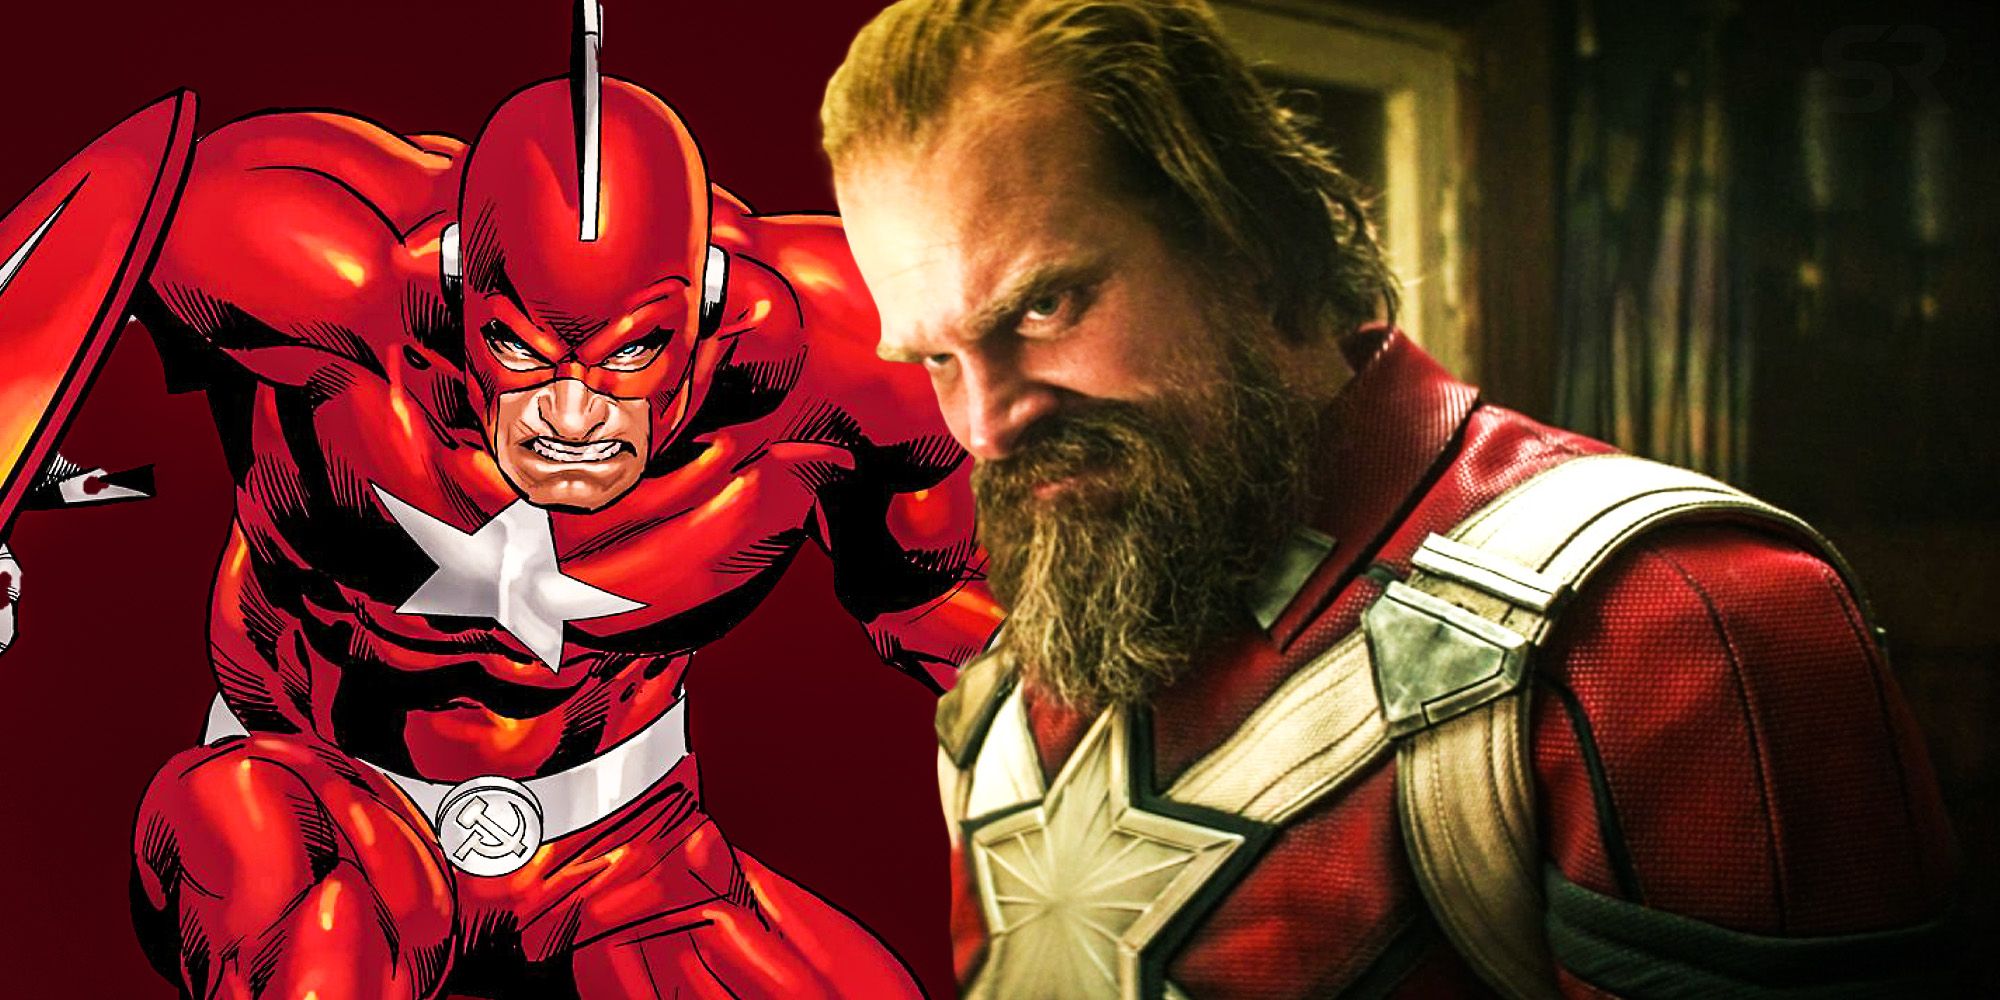 Red Guardian david Harbour Black widow Comparison to the comics